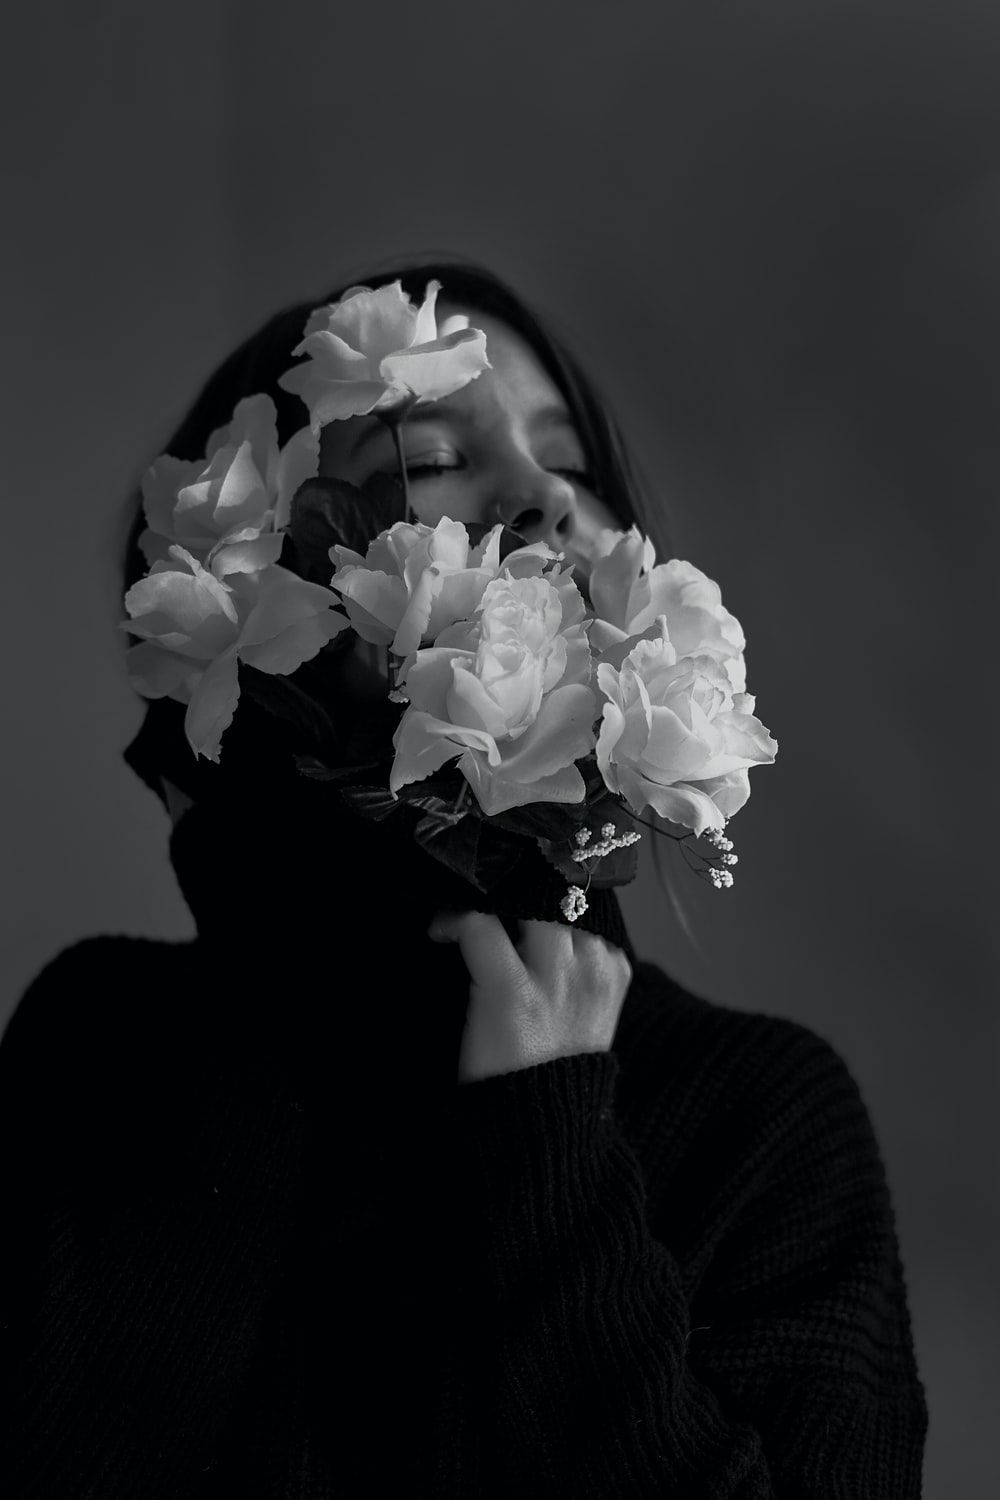 woman holding flowers photo